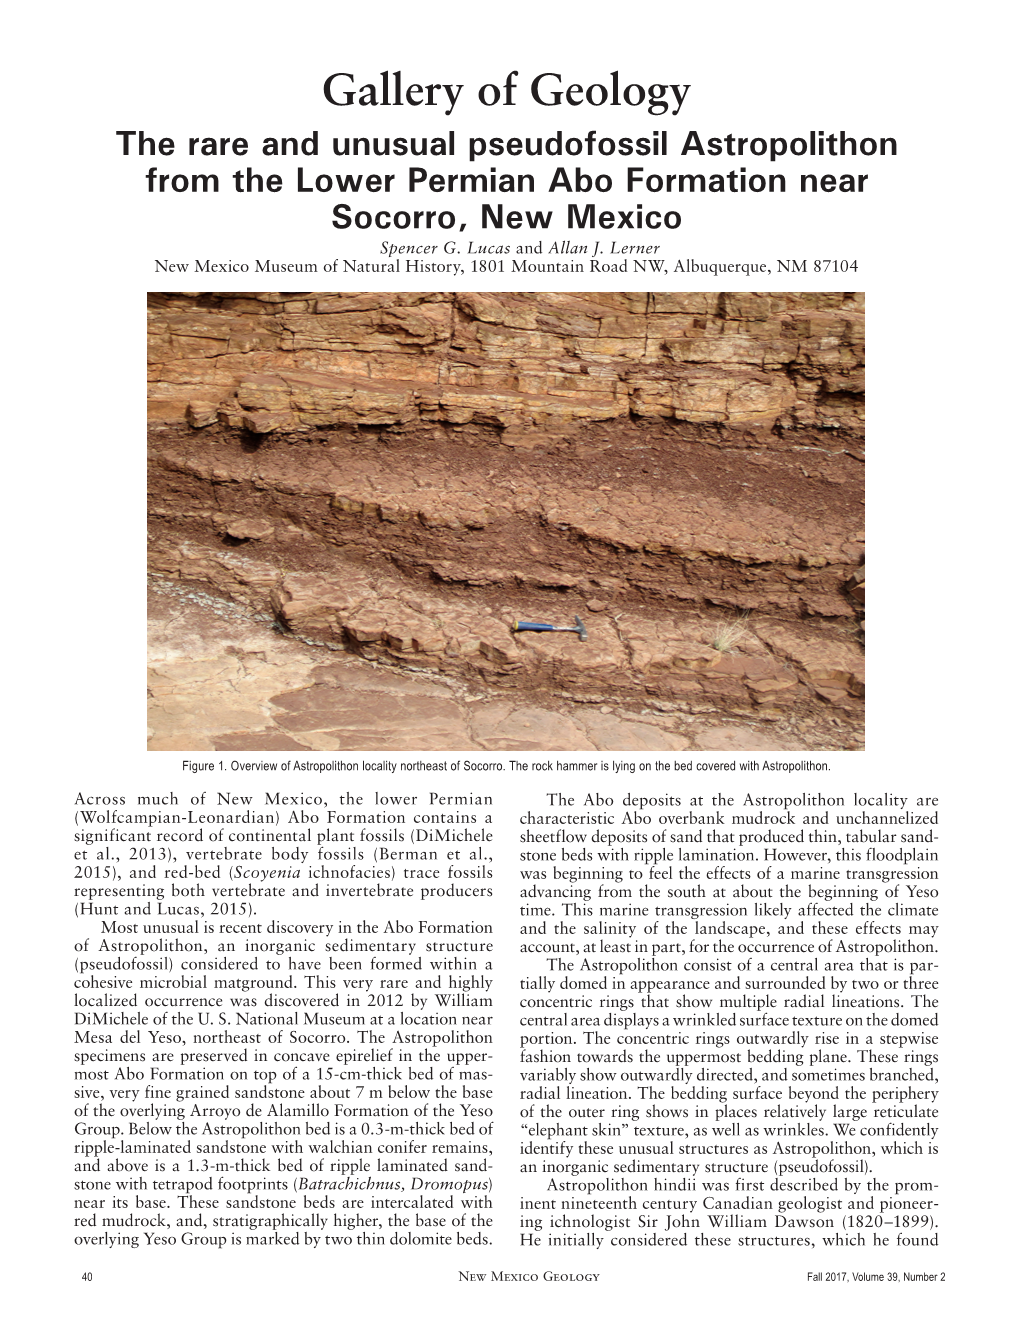 The Rare and Unusual Pseudofossil Astropolithon from the Lower Permian Abo Formation Near Socorro, New Mexico Spencer G